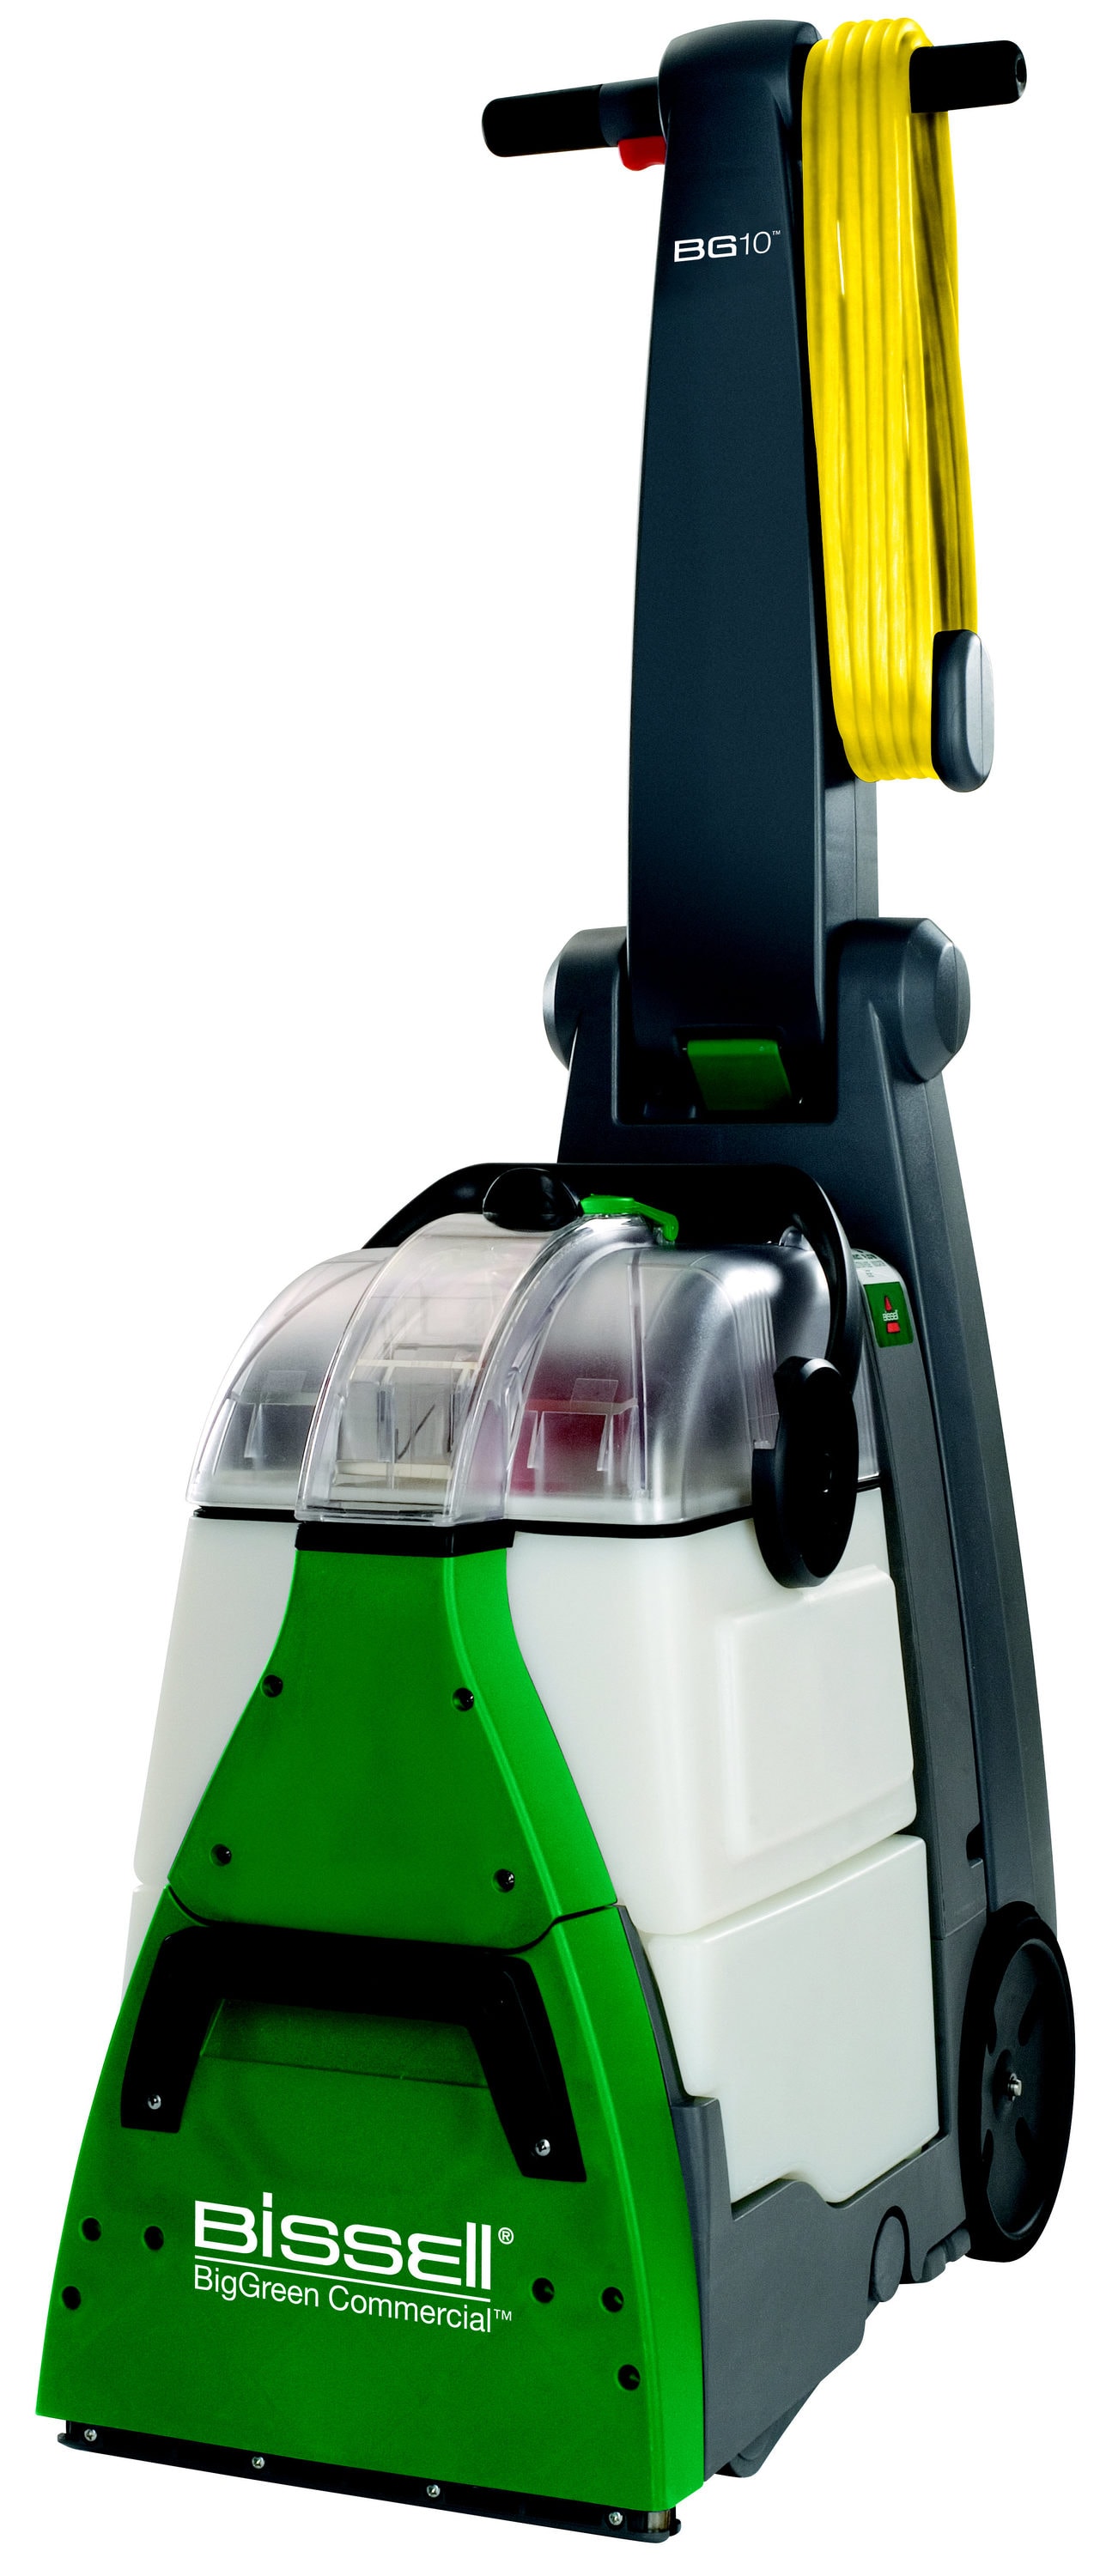 Bissell Commercial Carpet Extractor Carpet Cleaner in the Carpet